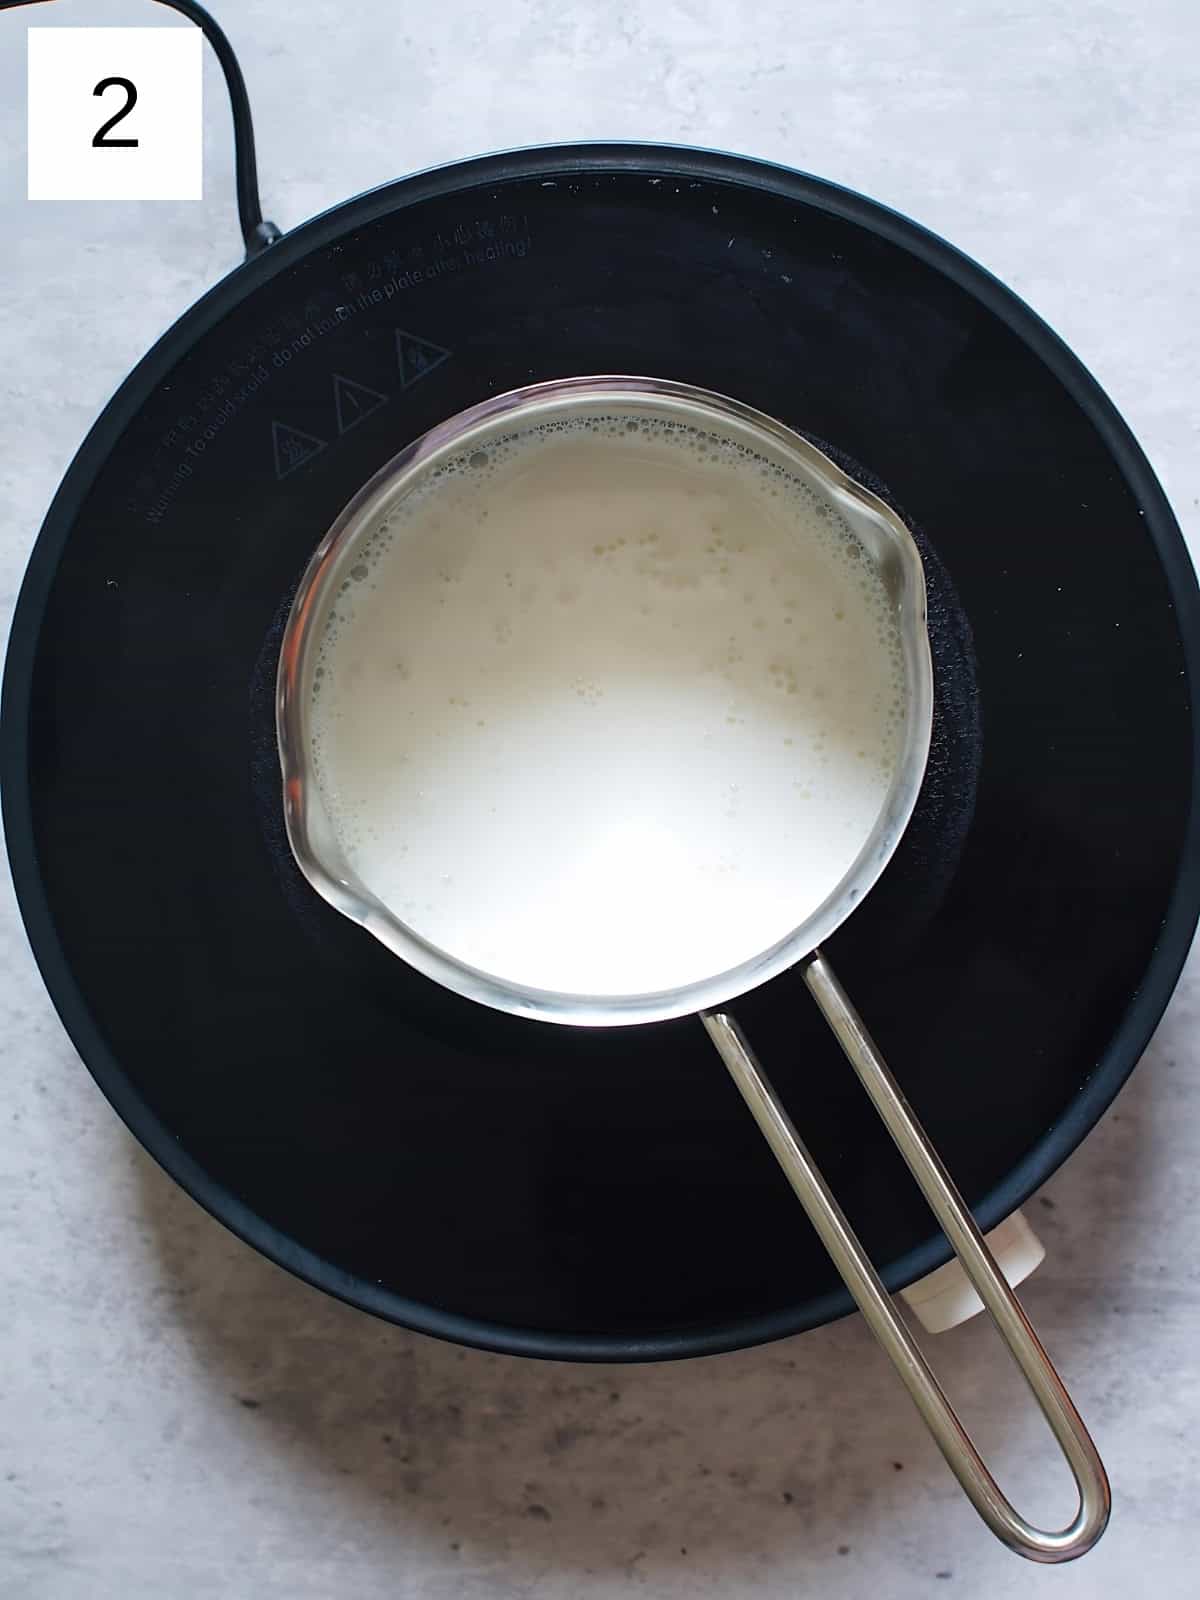 Milk being heated in a pan.